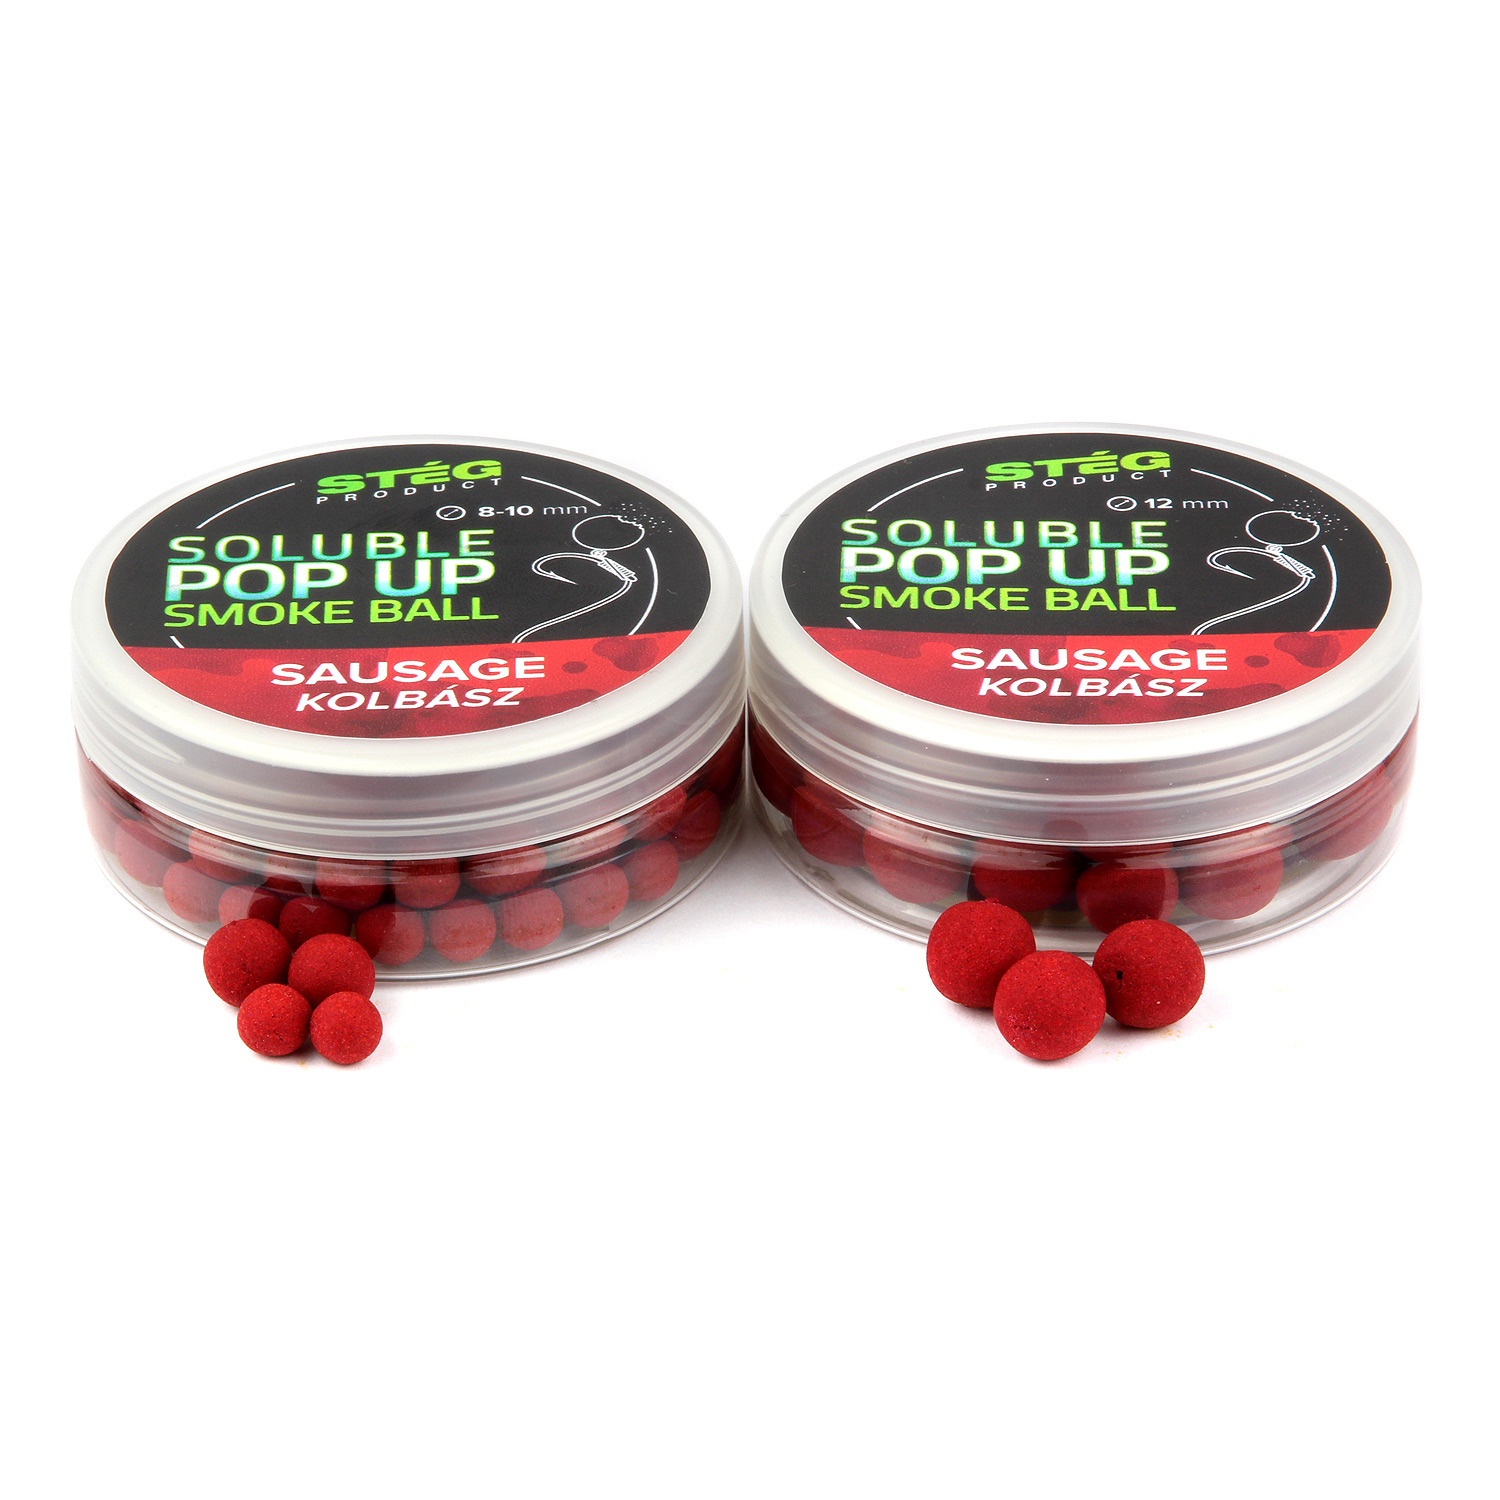 Stg Product Soluble Pop Up Smoke Ball 8-10mm Sausage 20g